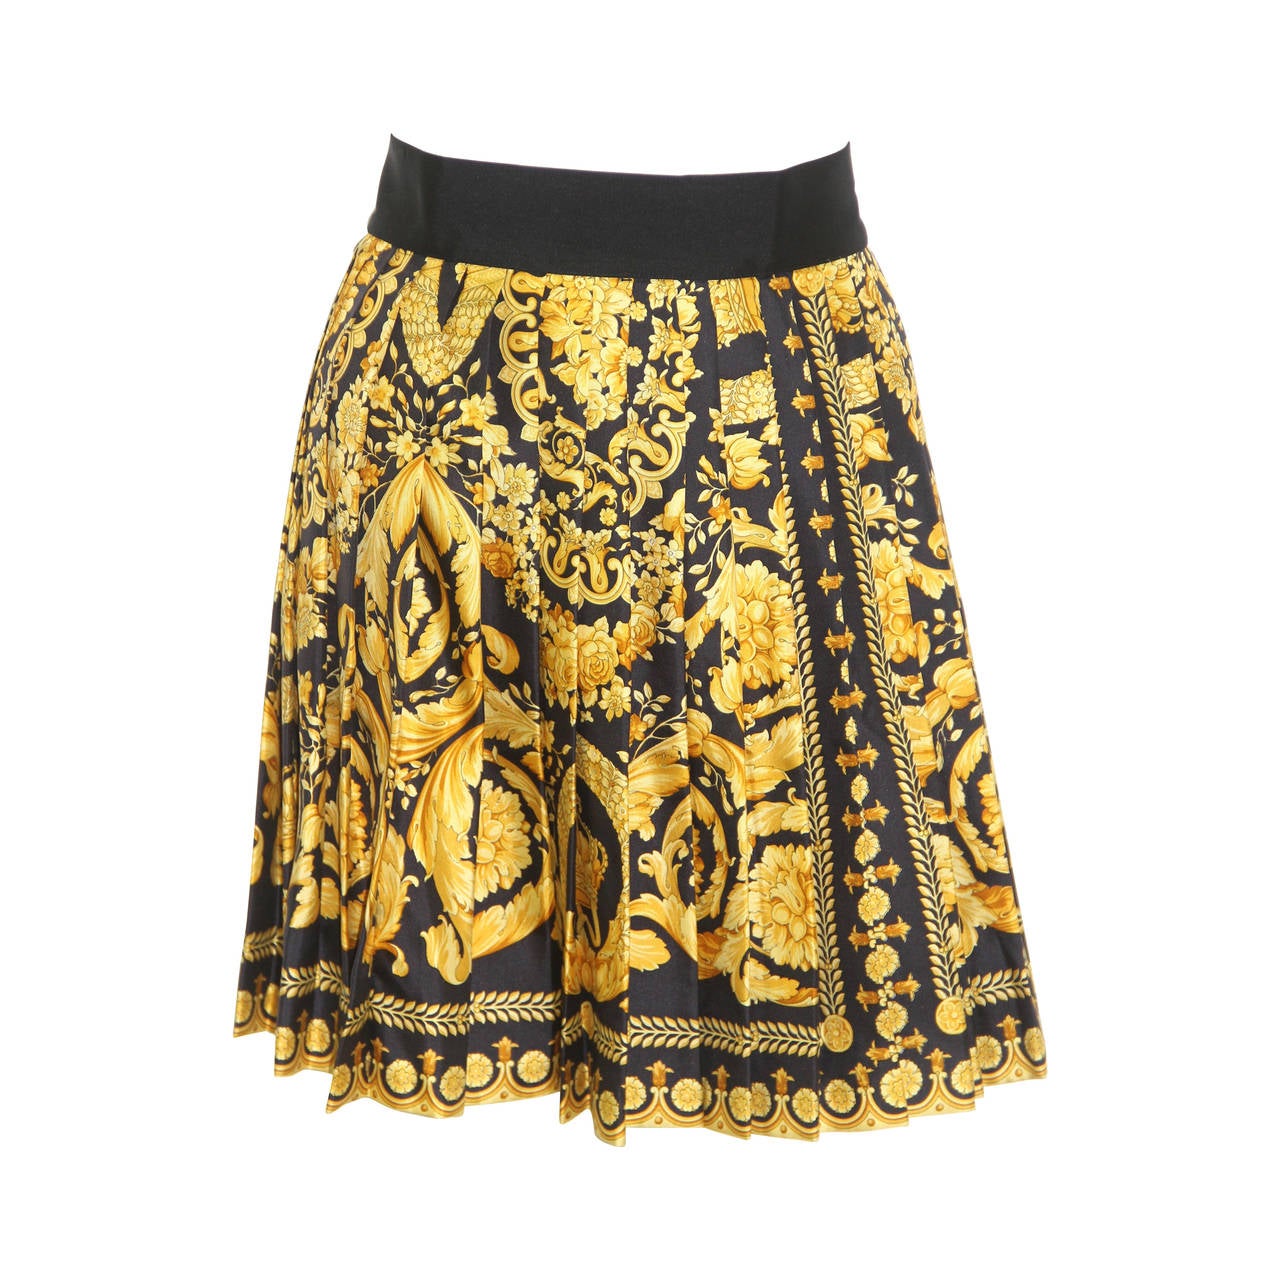 Museum Quality Gianni Versace Silk Baroque Printed Pleated Skirt Fall 1991 For Sale